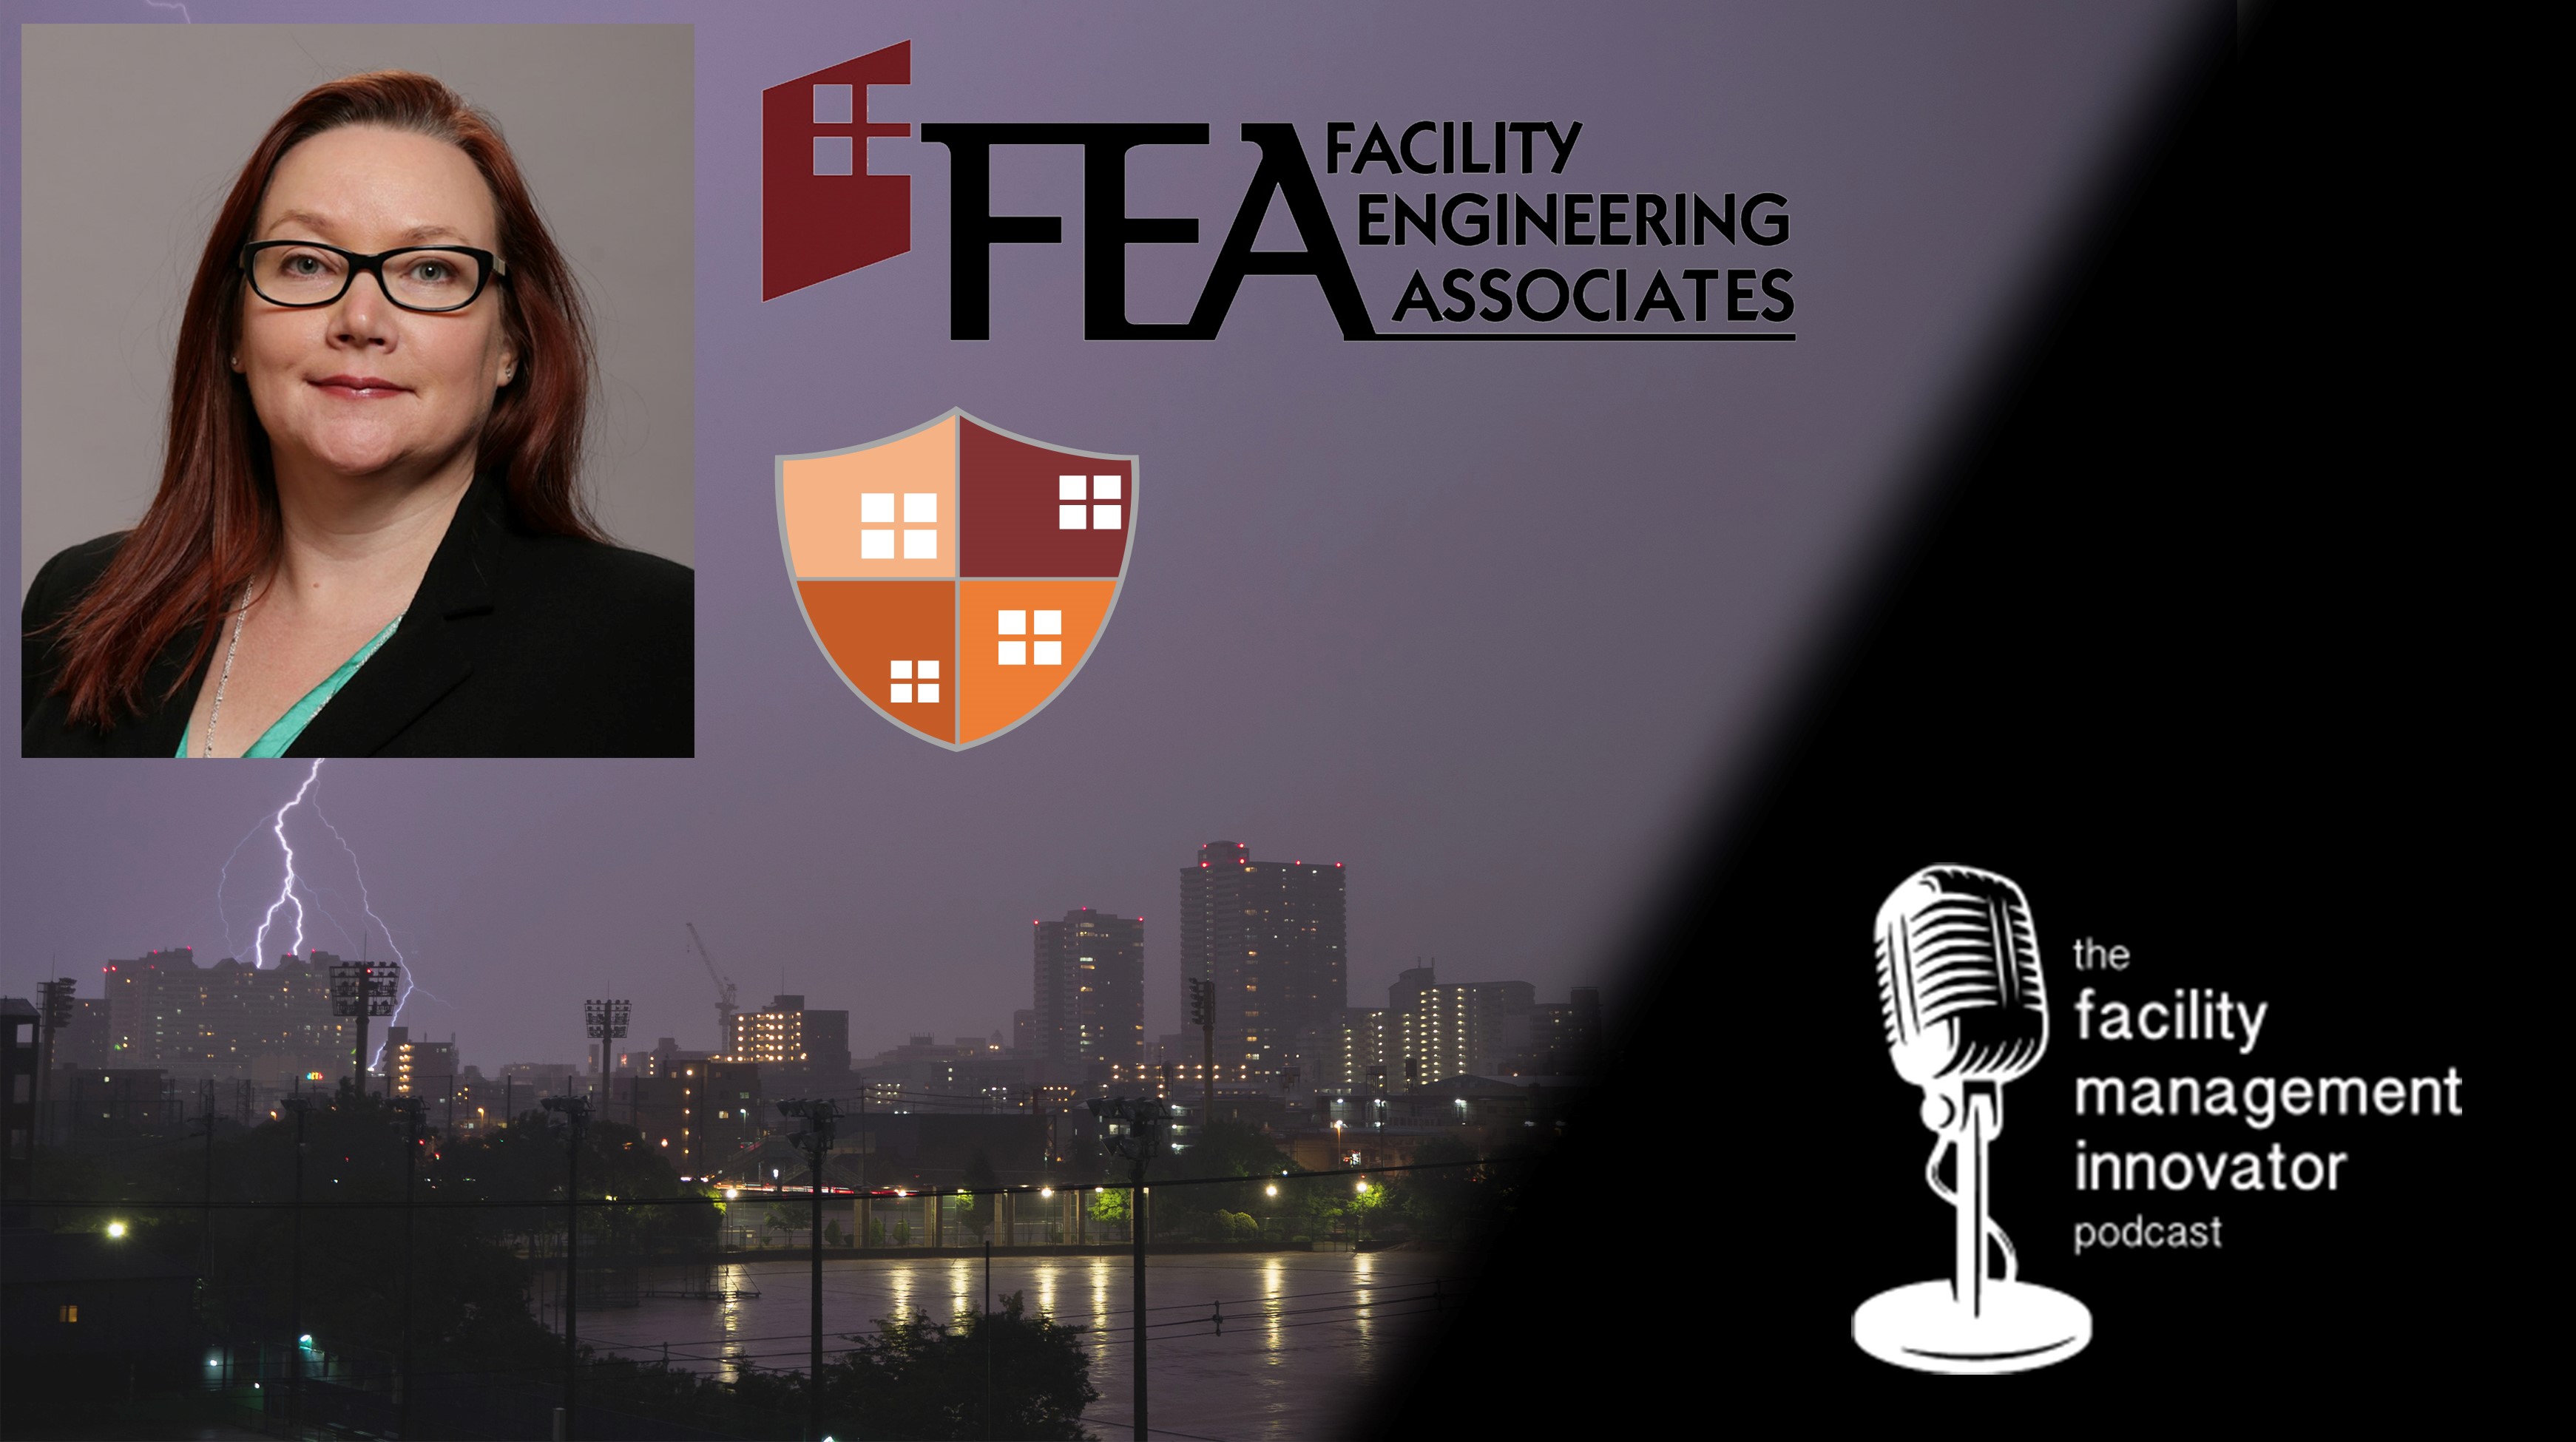 Ep. 56: Business Continuity & Resilience | Maureen Roskoski - Senior Professional at FEA